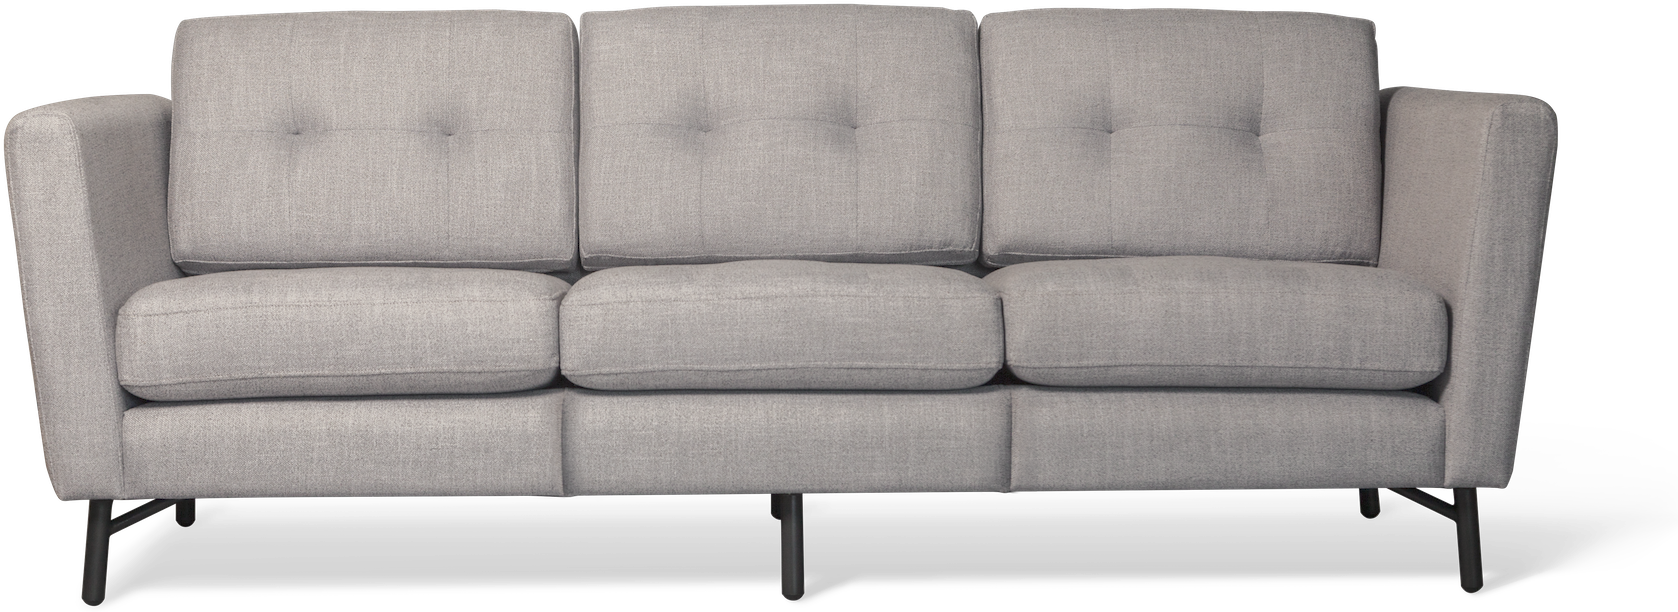 Couch Png File - Couch (1696x634), Png Download